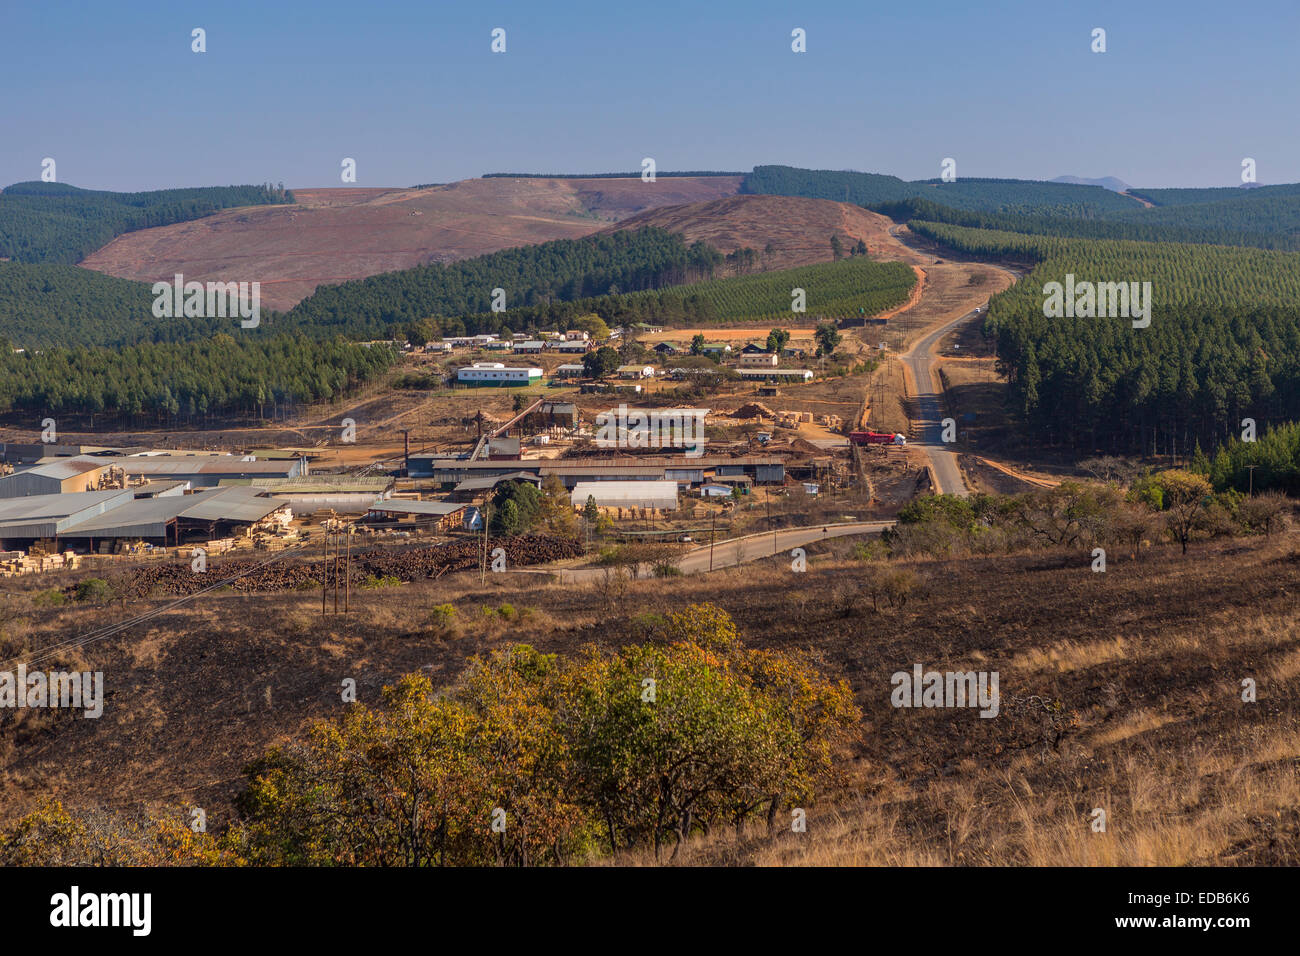 HHOHHO, SWAZILAND, AFRICA - Sawmill and tree plantation near town of Piggs Peak. Stock Photo